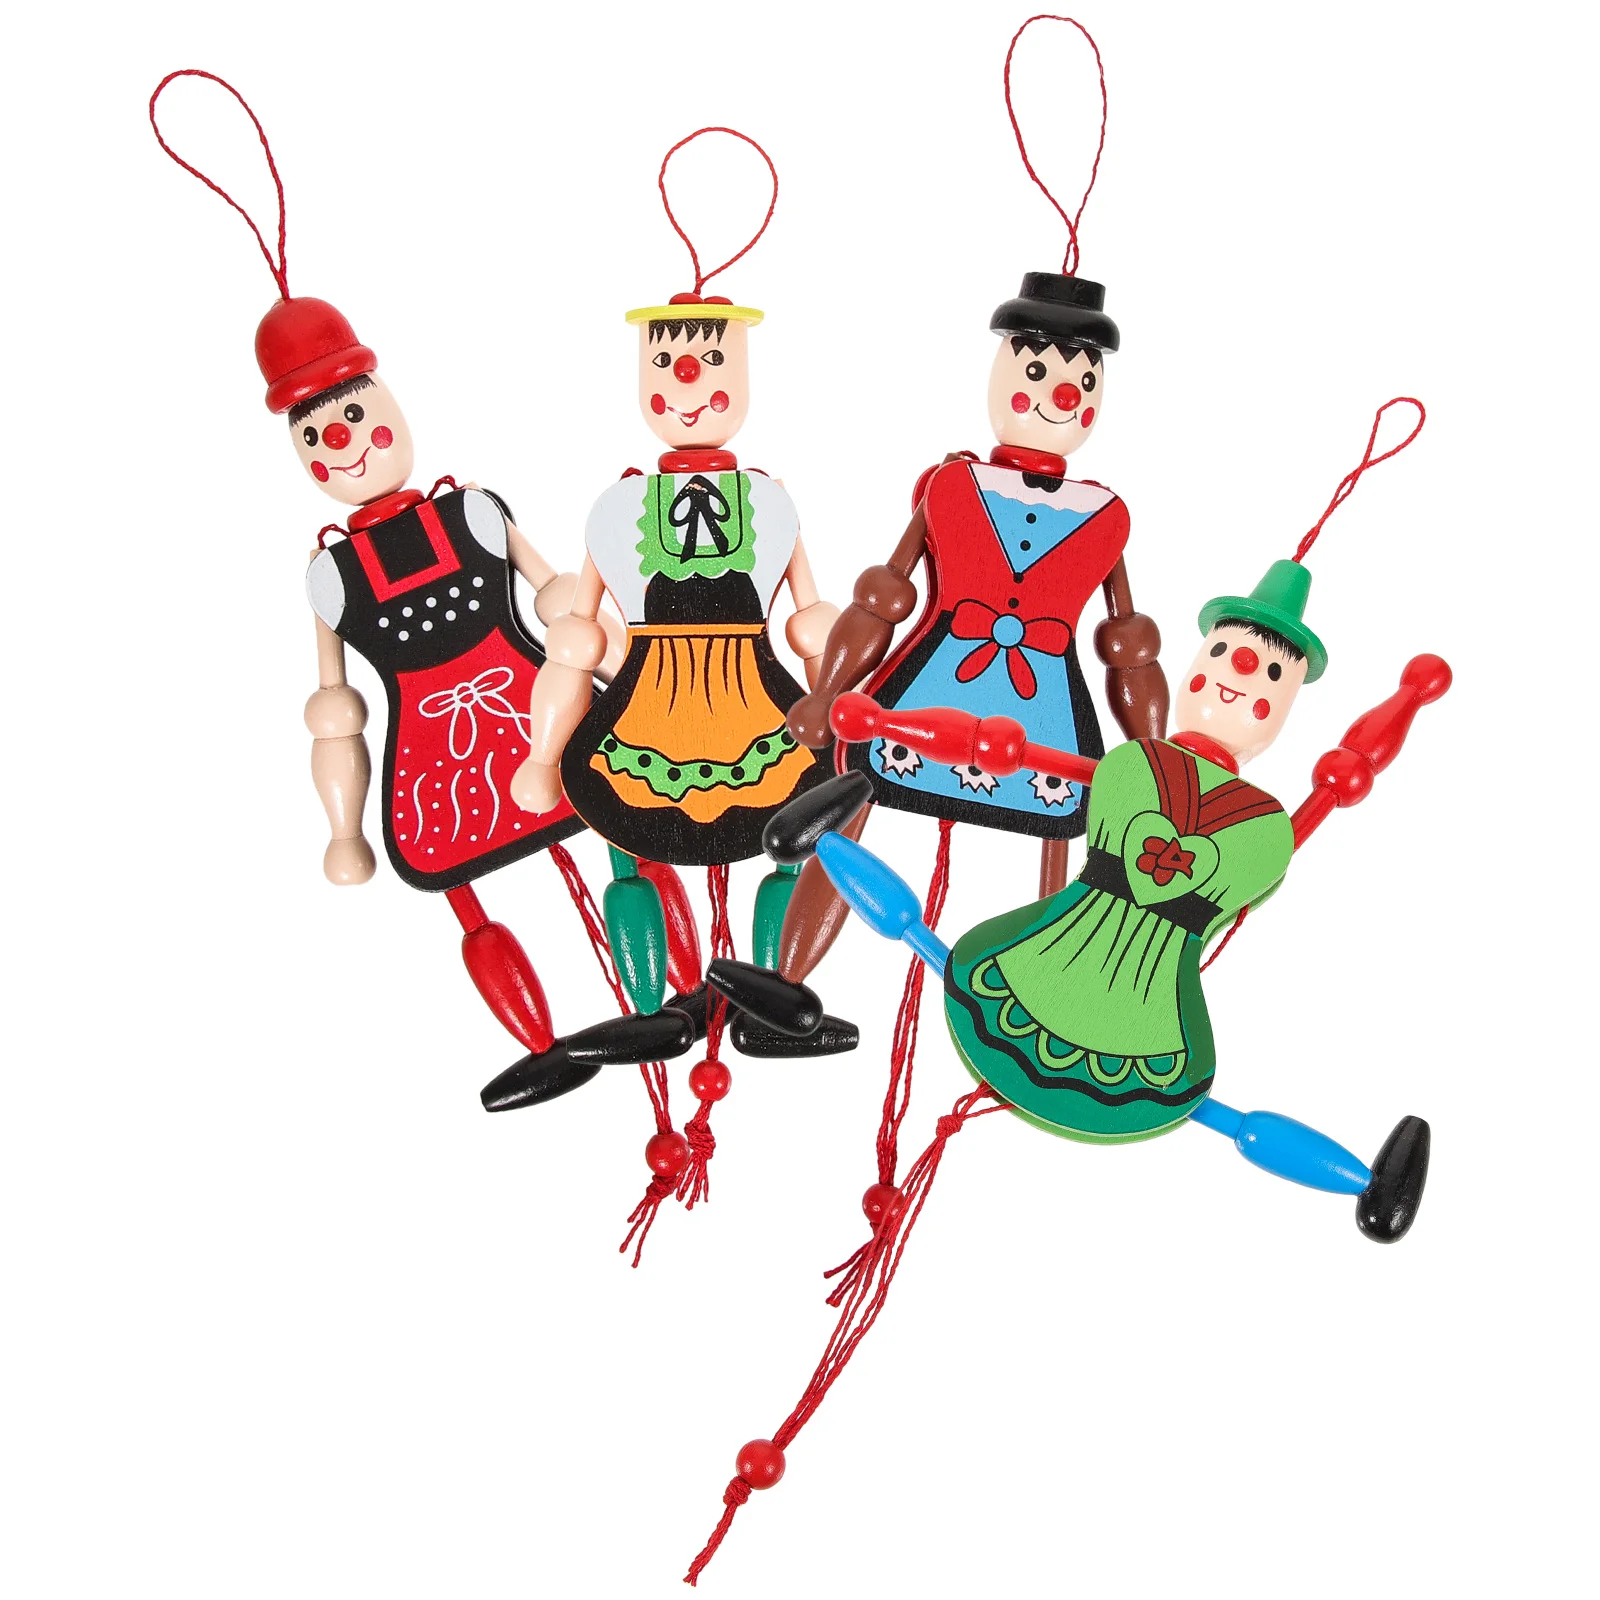 

Wood Puppets Toys Margaretha Wood Hanging String Puppet Toys with Movable Hands and Feet for Parent Child Interactive Toys 4pcs